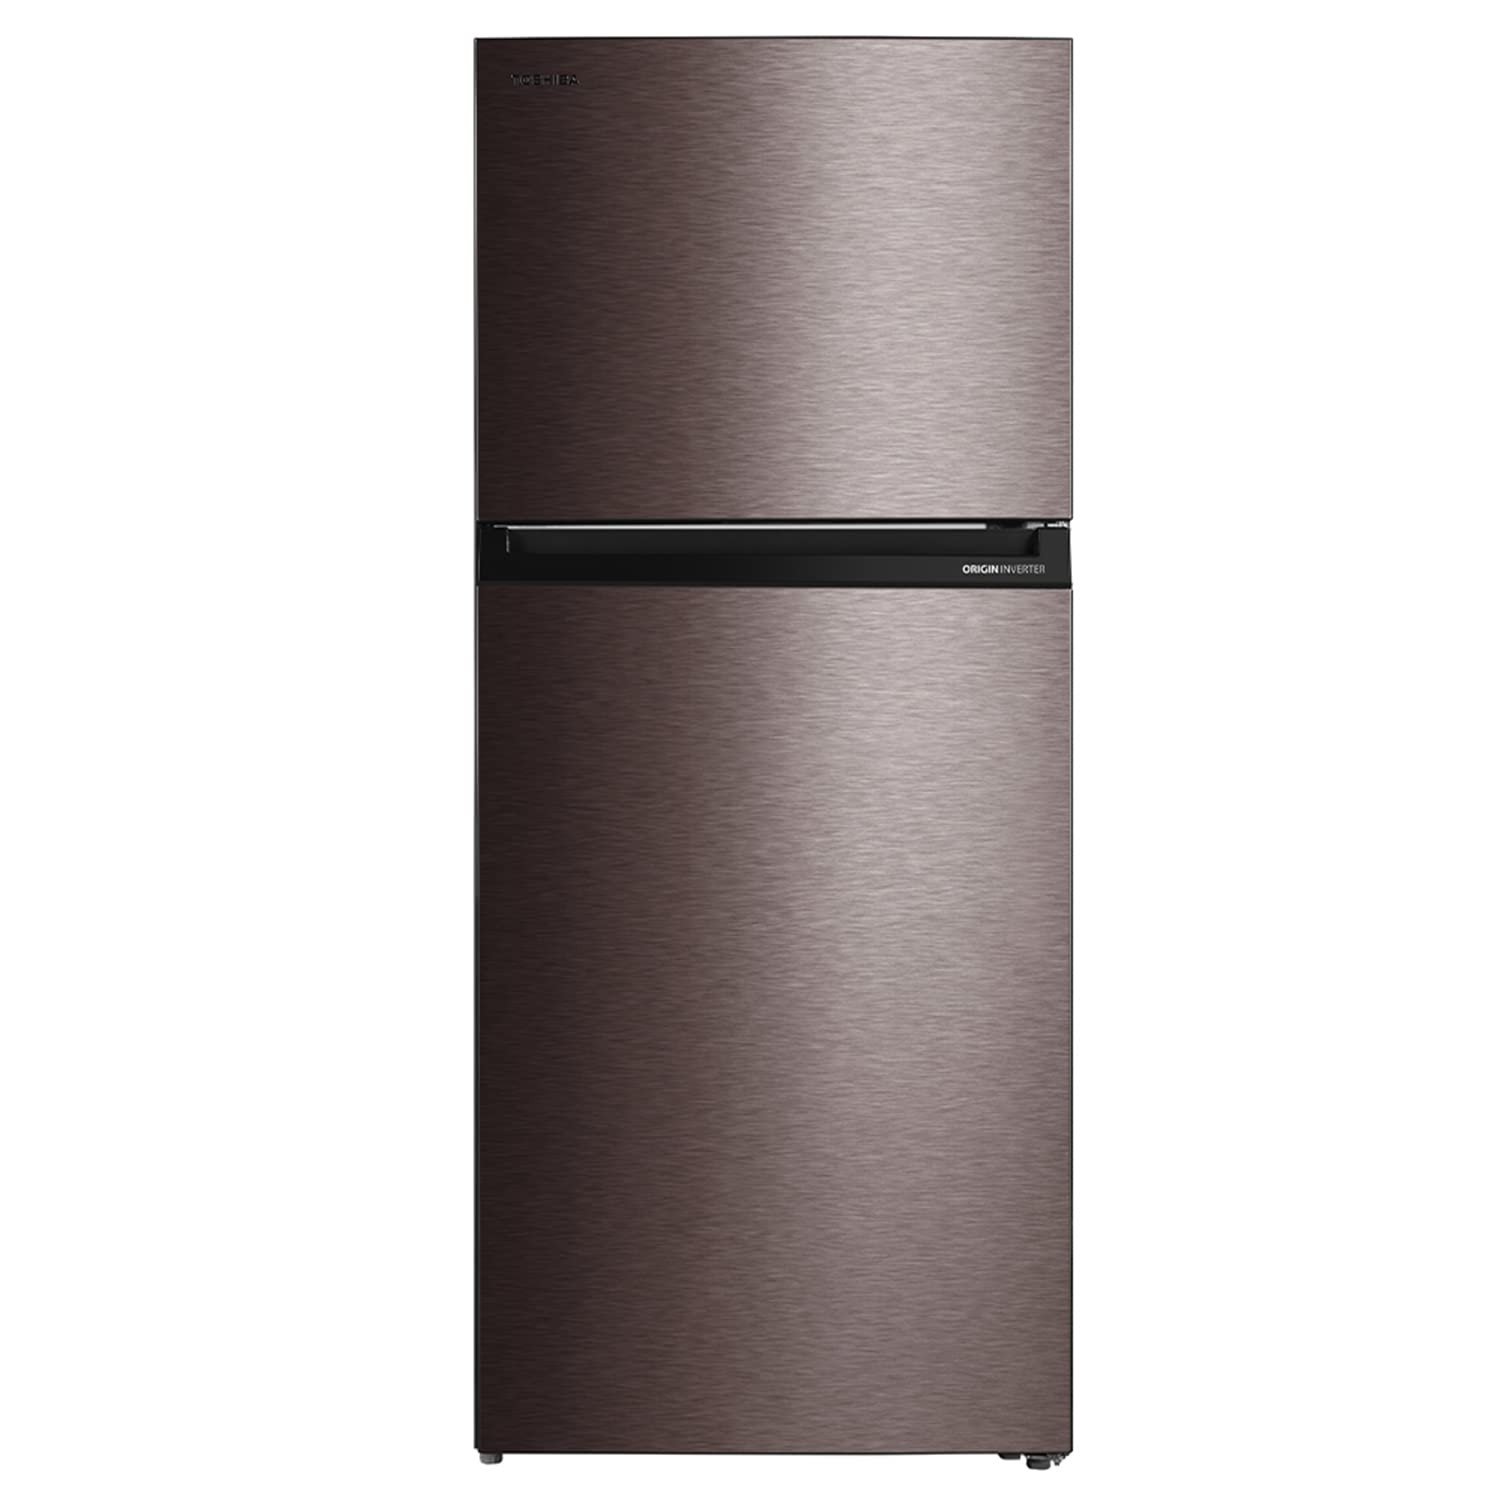 Toshiba 439 L 2 Star Frost Free Inverter Air Fall Cooling Double Door (GR-RT559WE-PMI(37), Satin Grey)